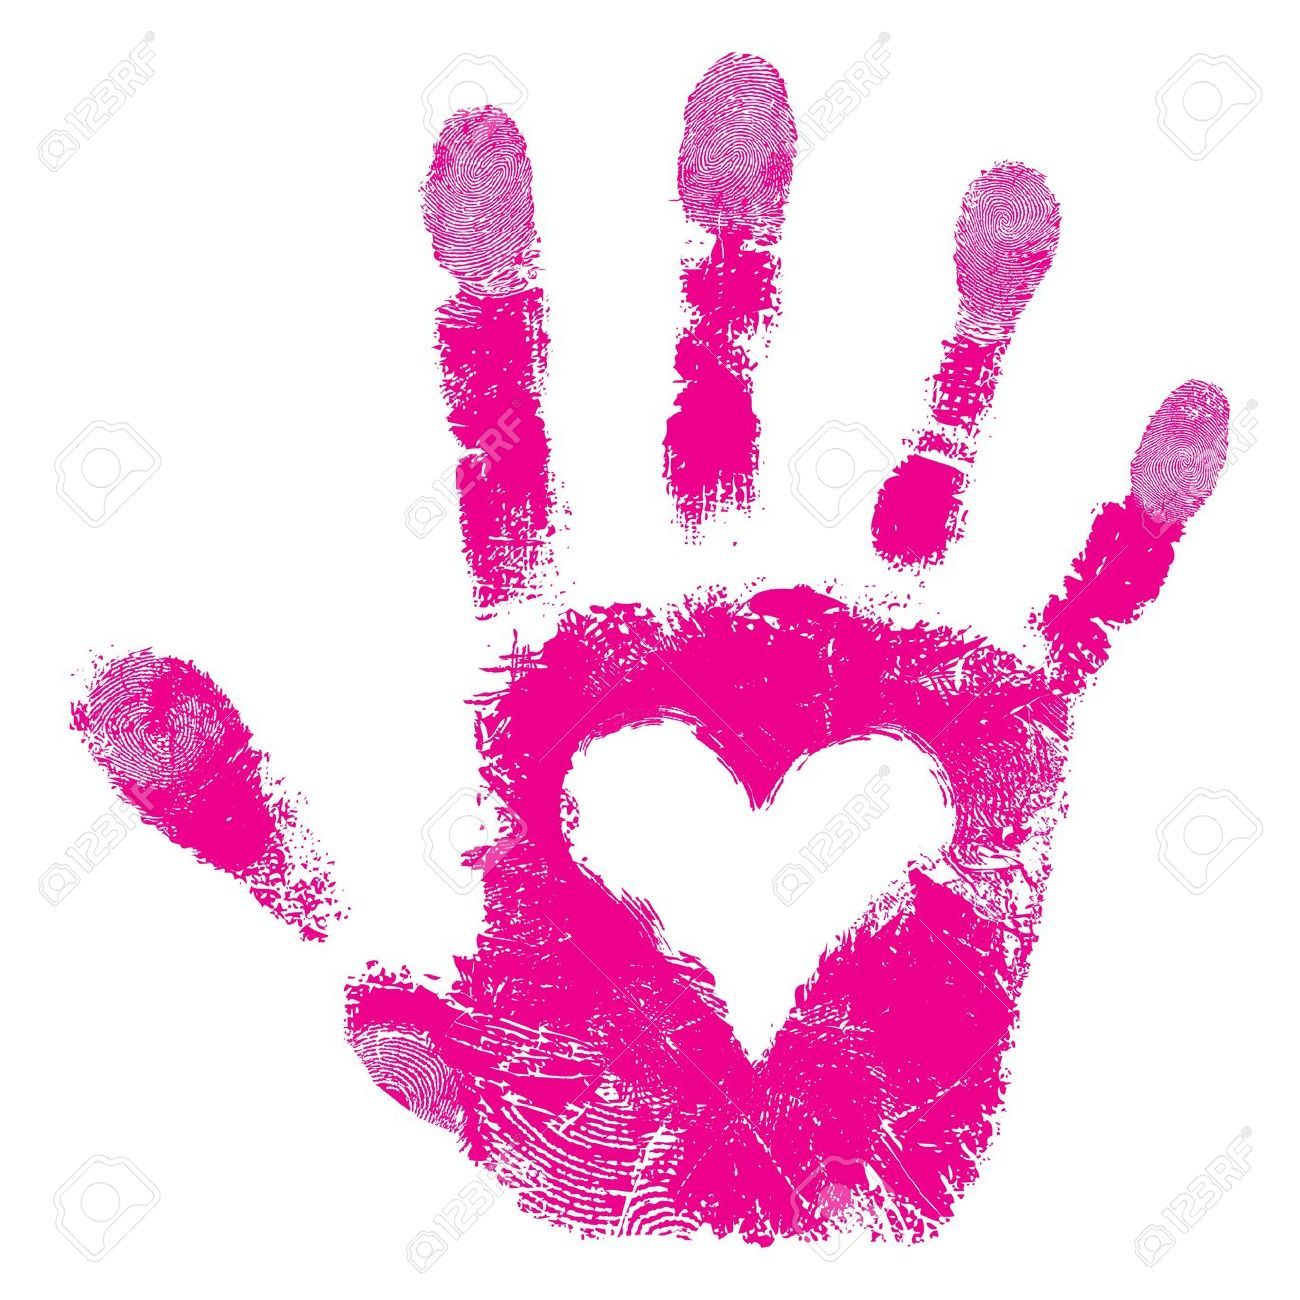 Free Handprint Clipart pink, Download Free Clip Art on Owips